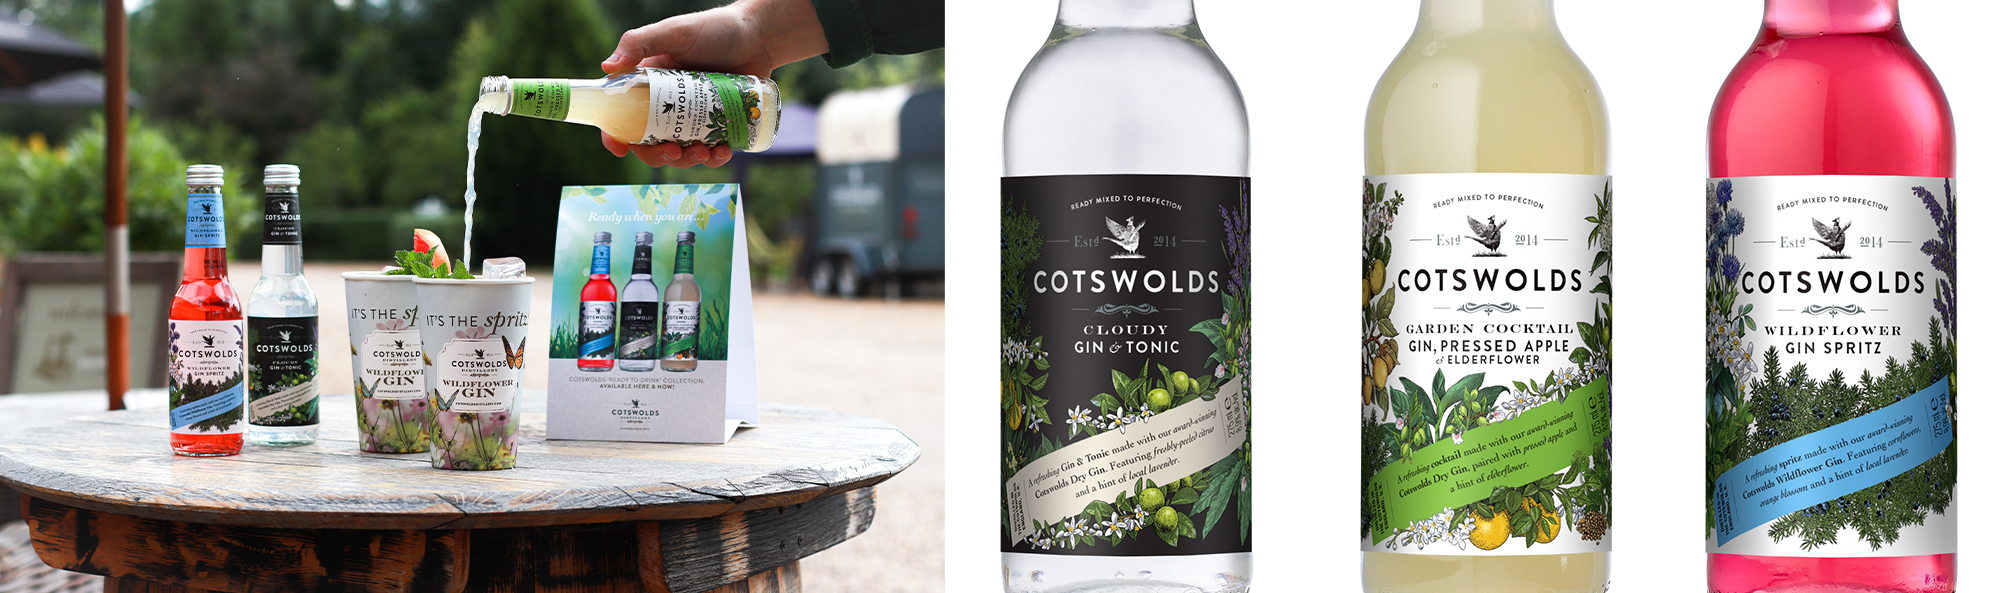 New Products from the Cotswold's Distillery